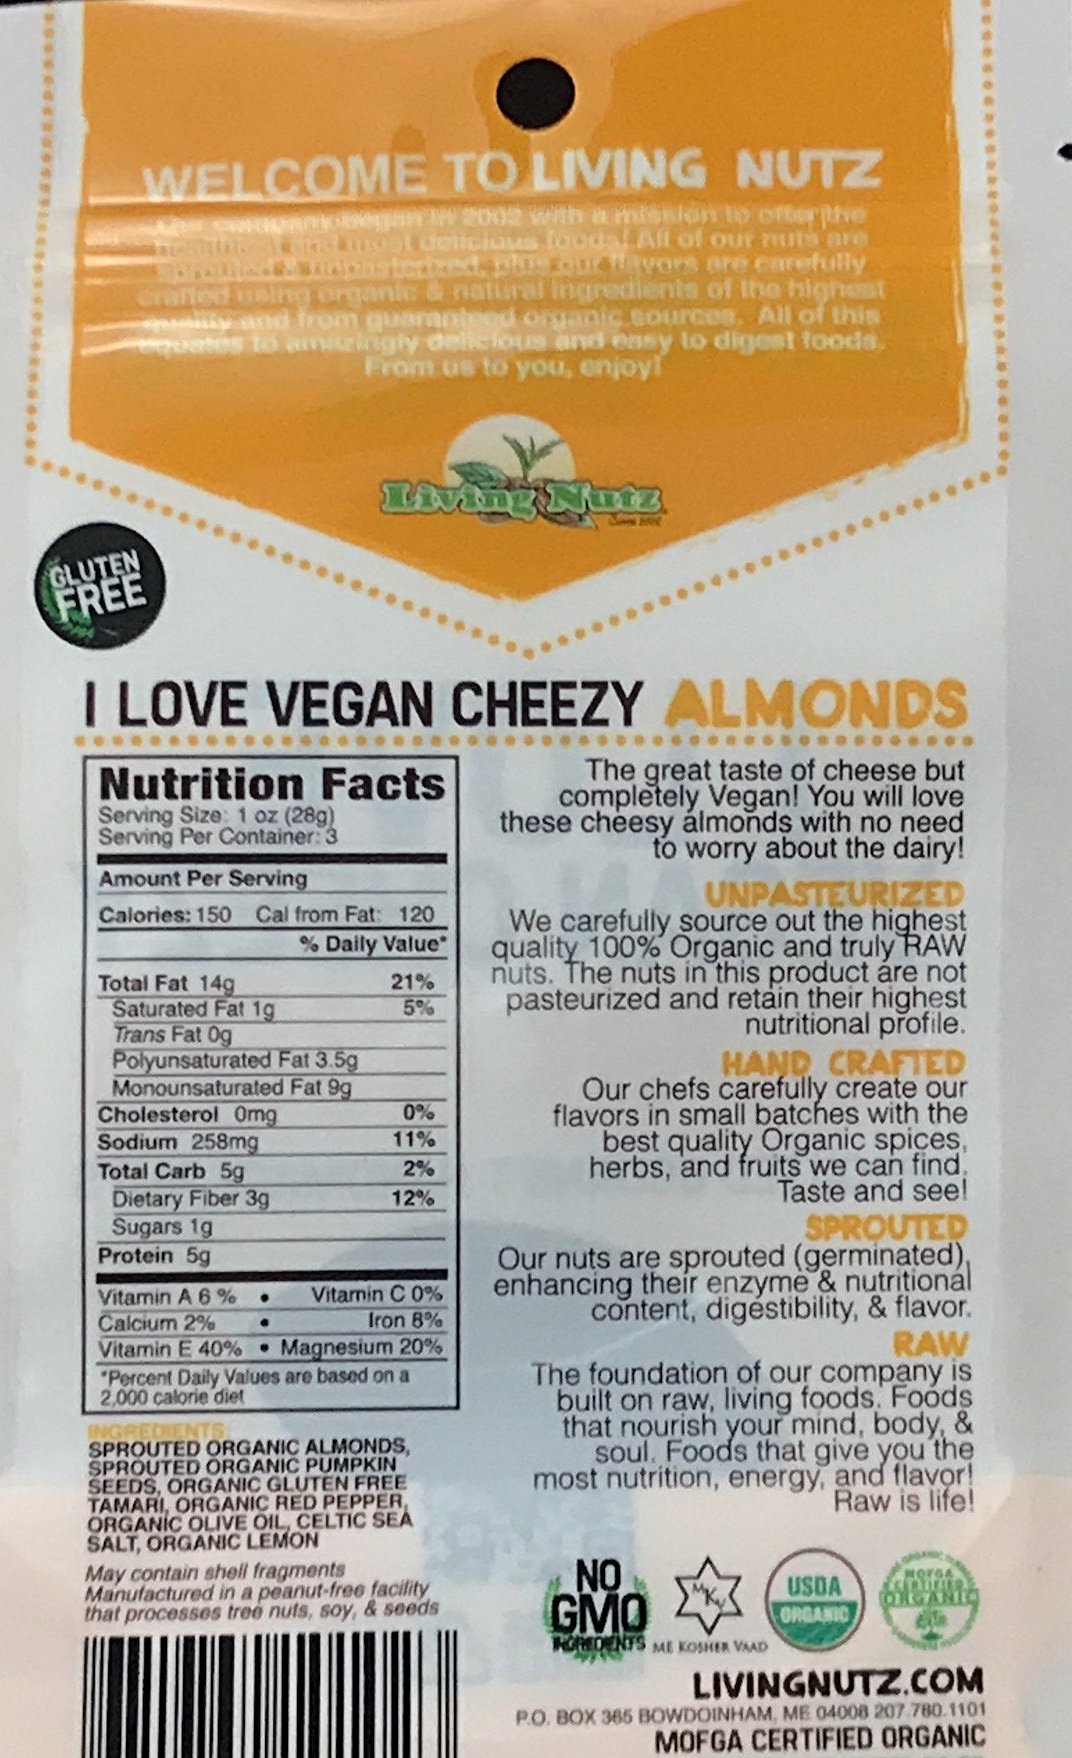 Organic raw sprouted nuts. Sprouted raw & unpasteurized almonds vegan cheesy flavor. Living Nutz